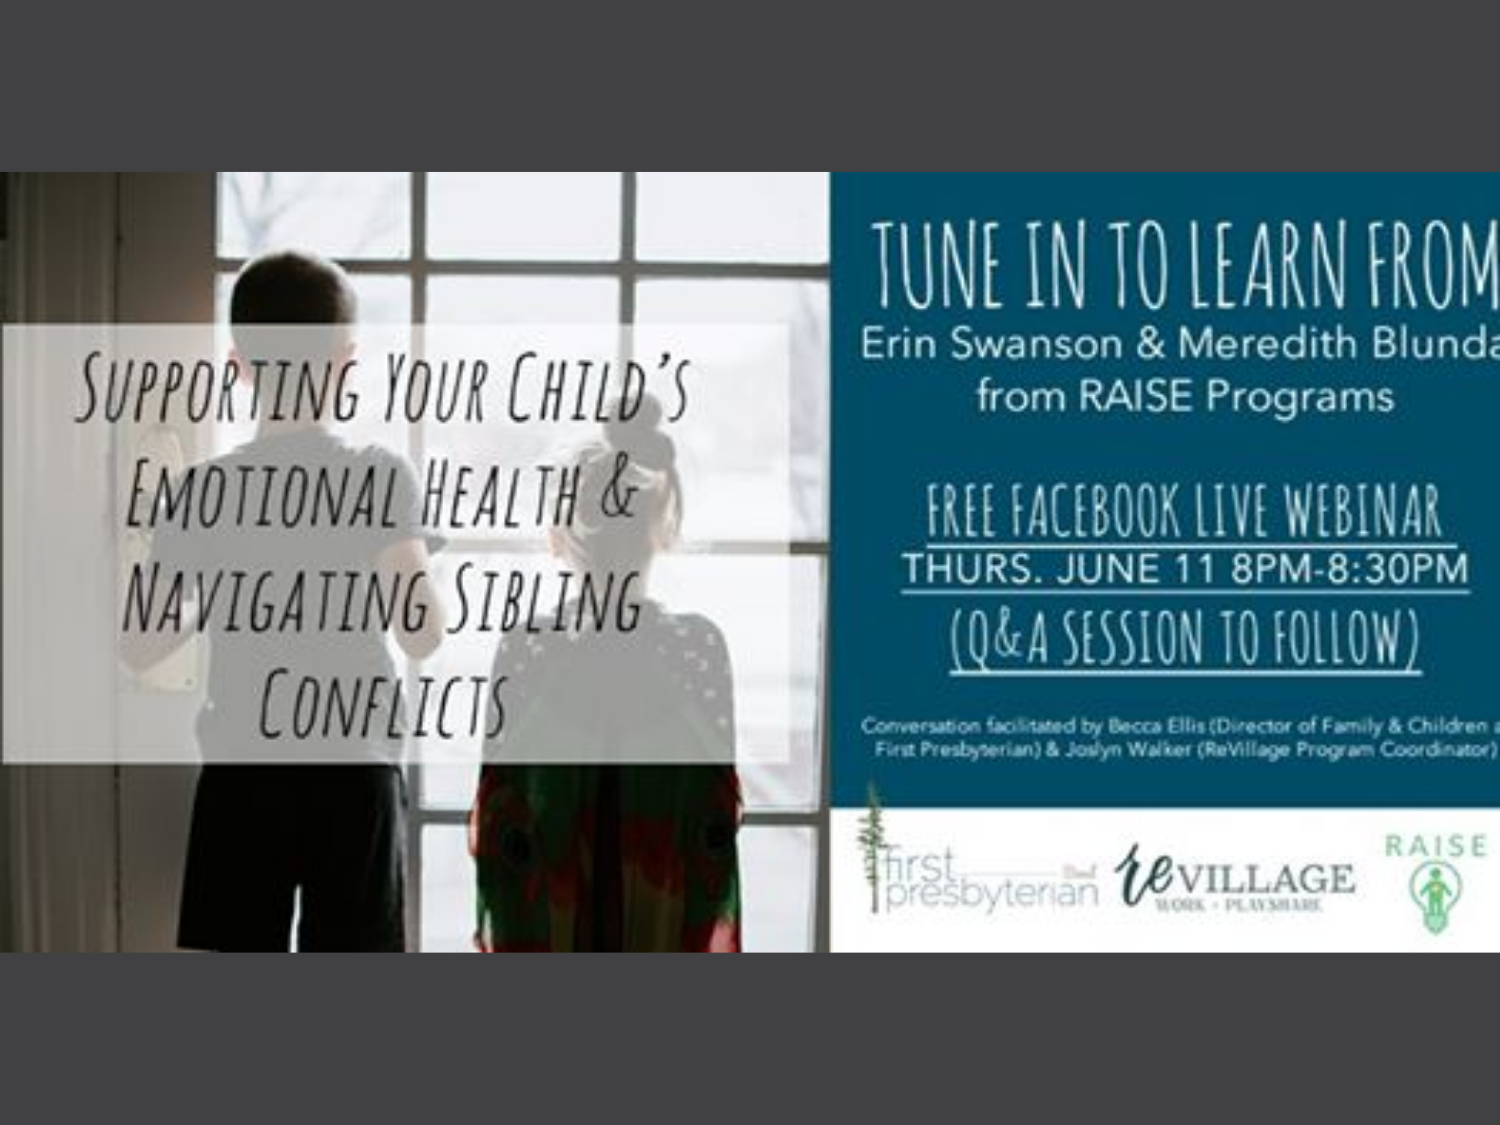 Supporting Emotional Health & Navigating Sibling Conflict